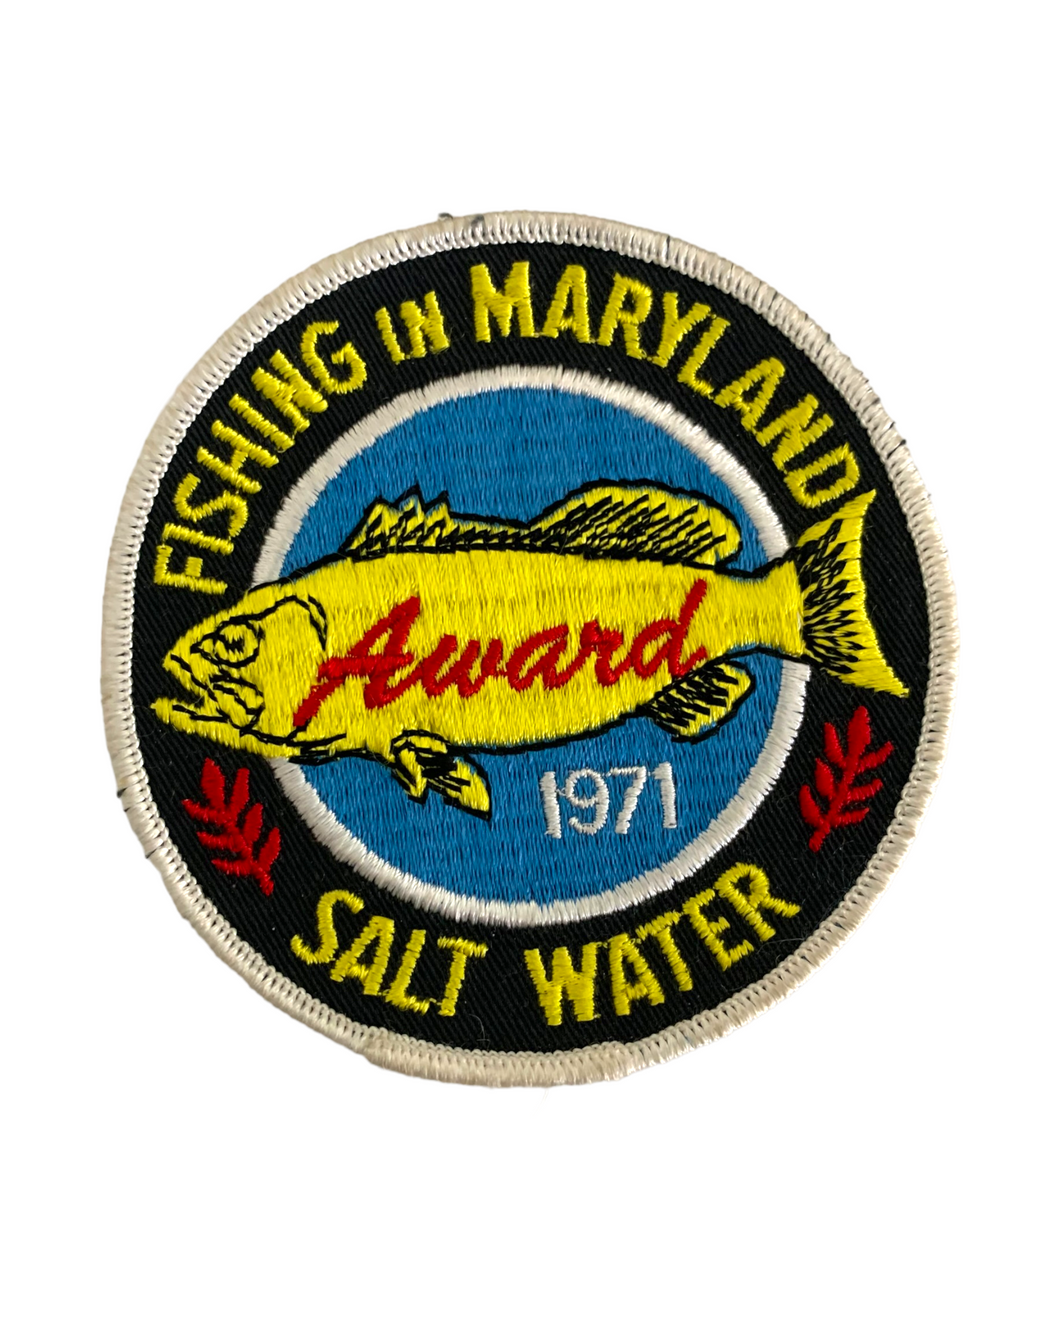 FISHING IN MARYLAND SALT WATER 1971 AWARD PATCH in  Black, Yellow, White, Red, & Sky Blue